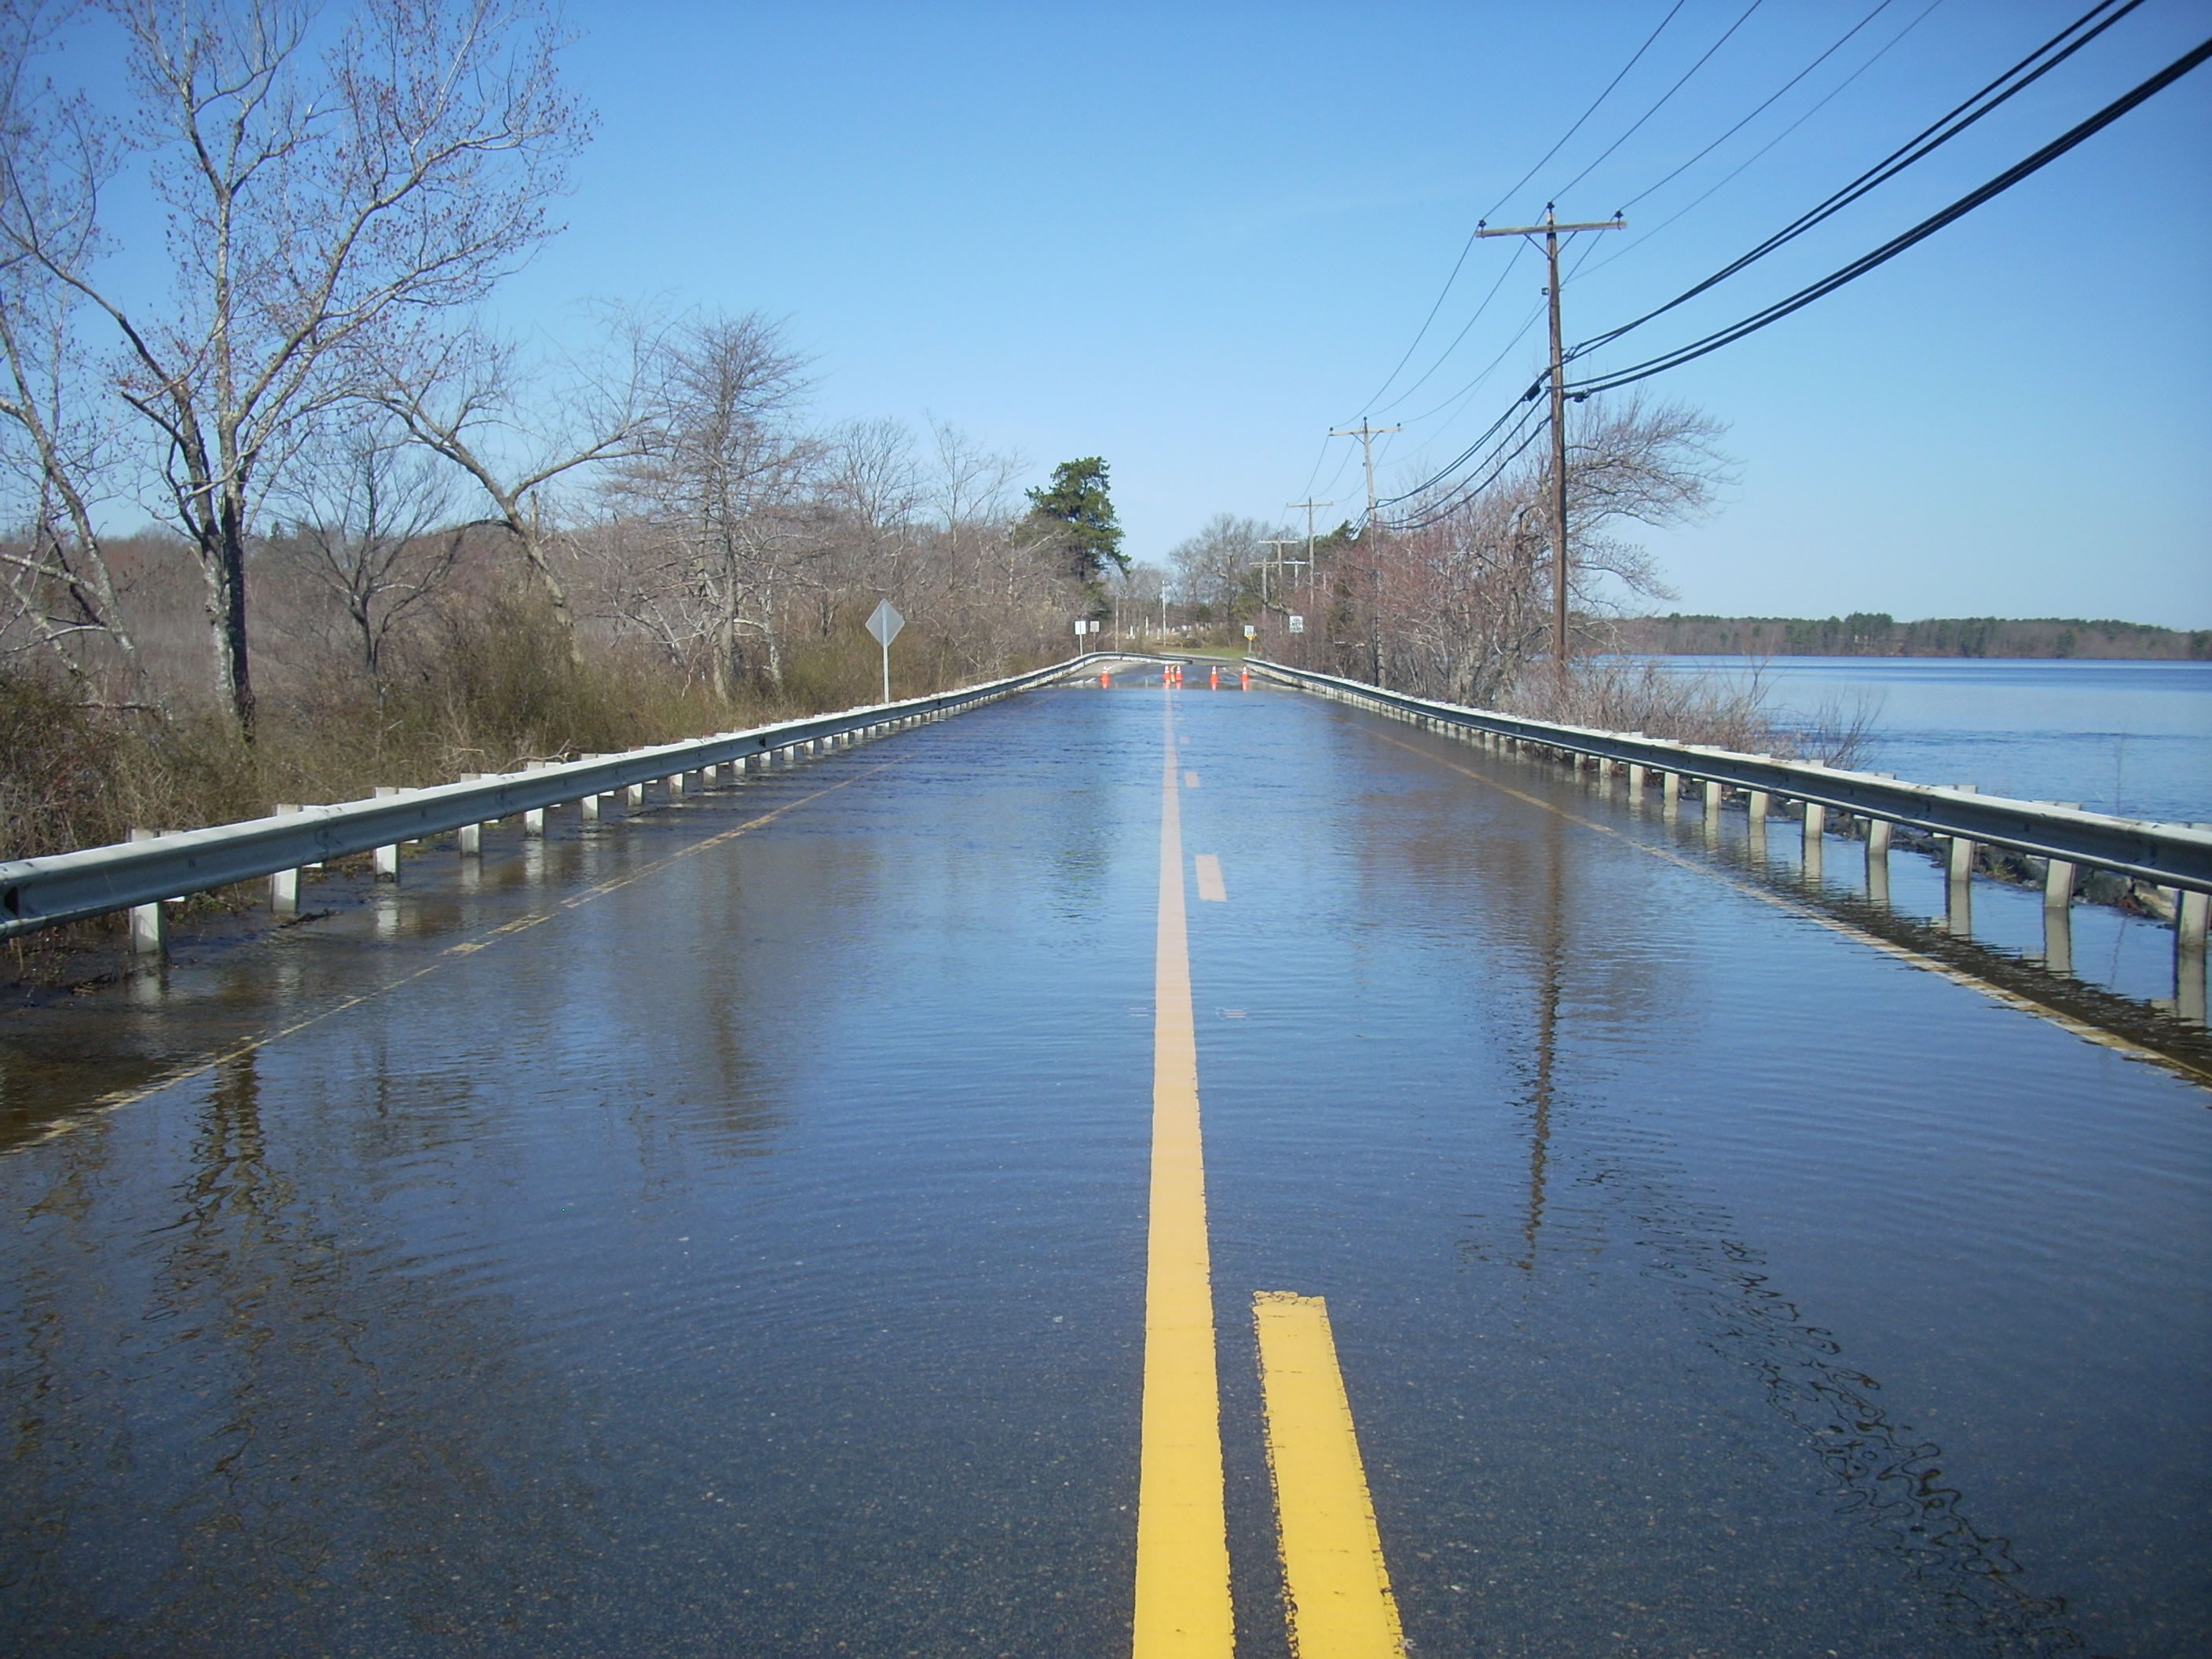  Photo shows 9 inches of water on road in Lakeville - Flood 2010